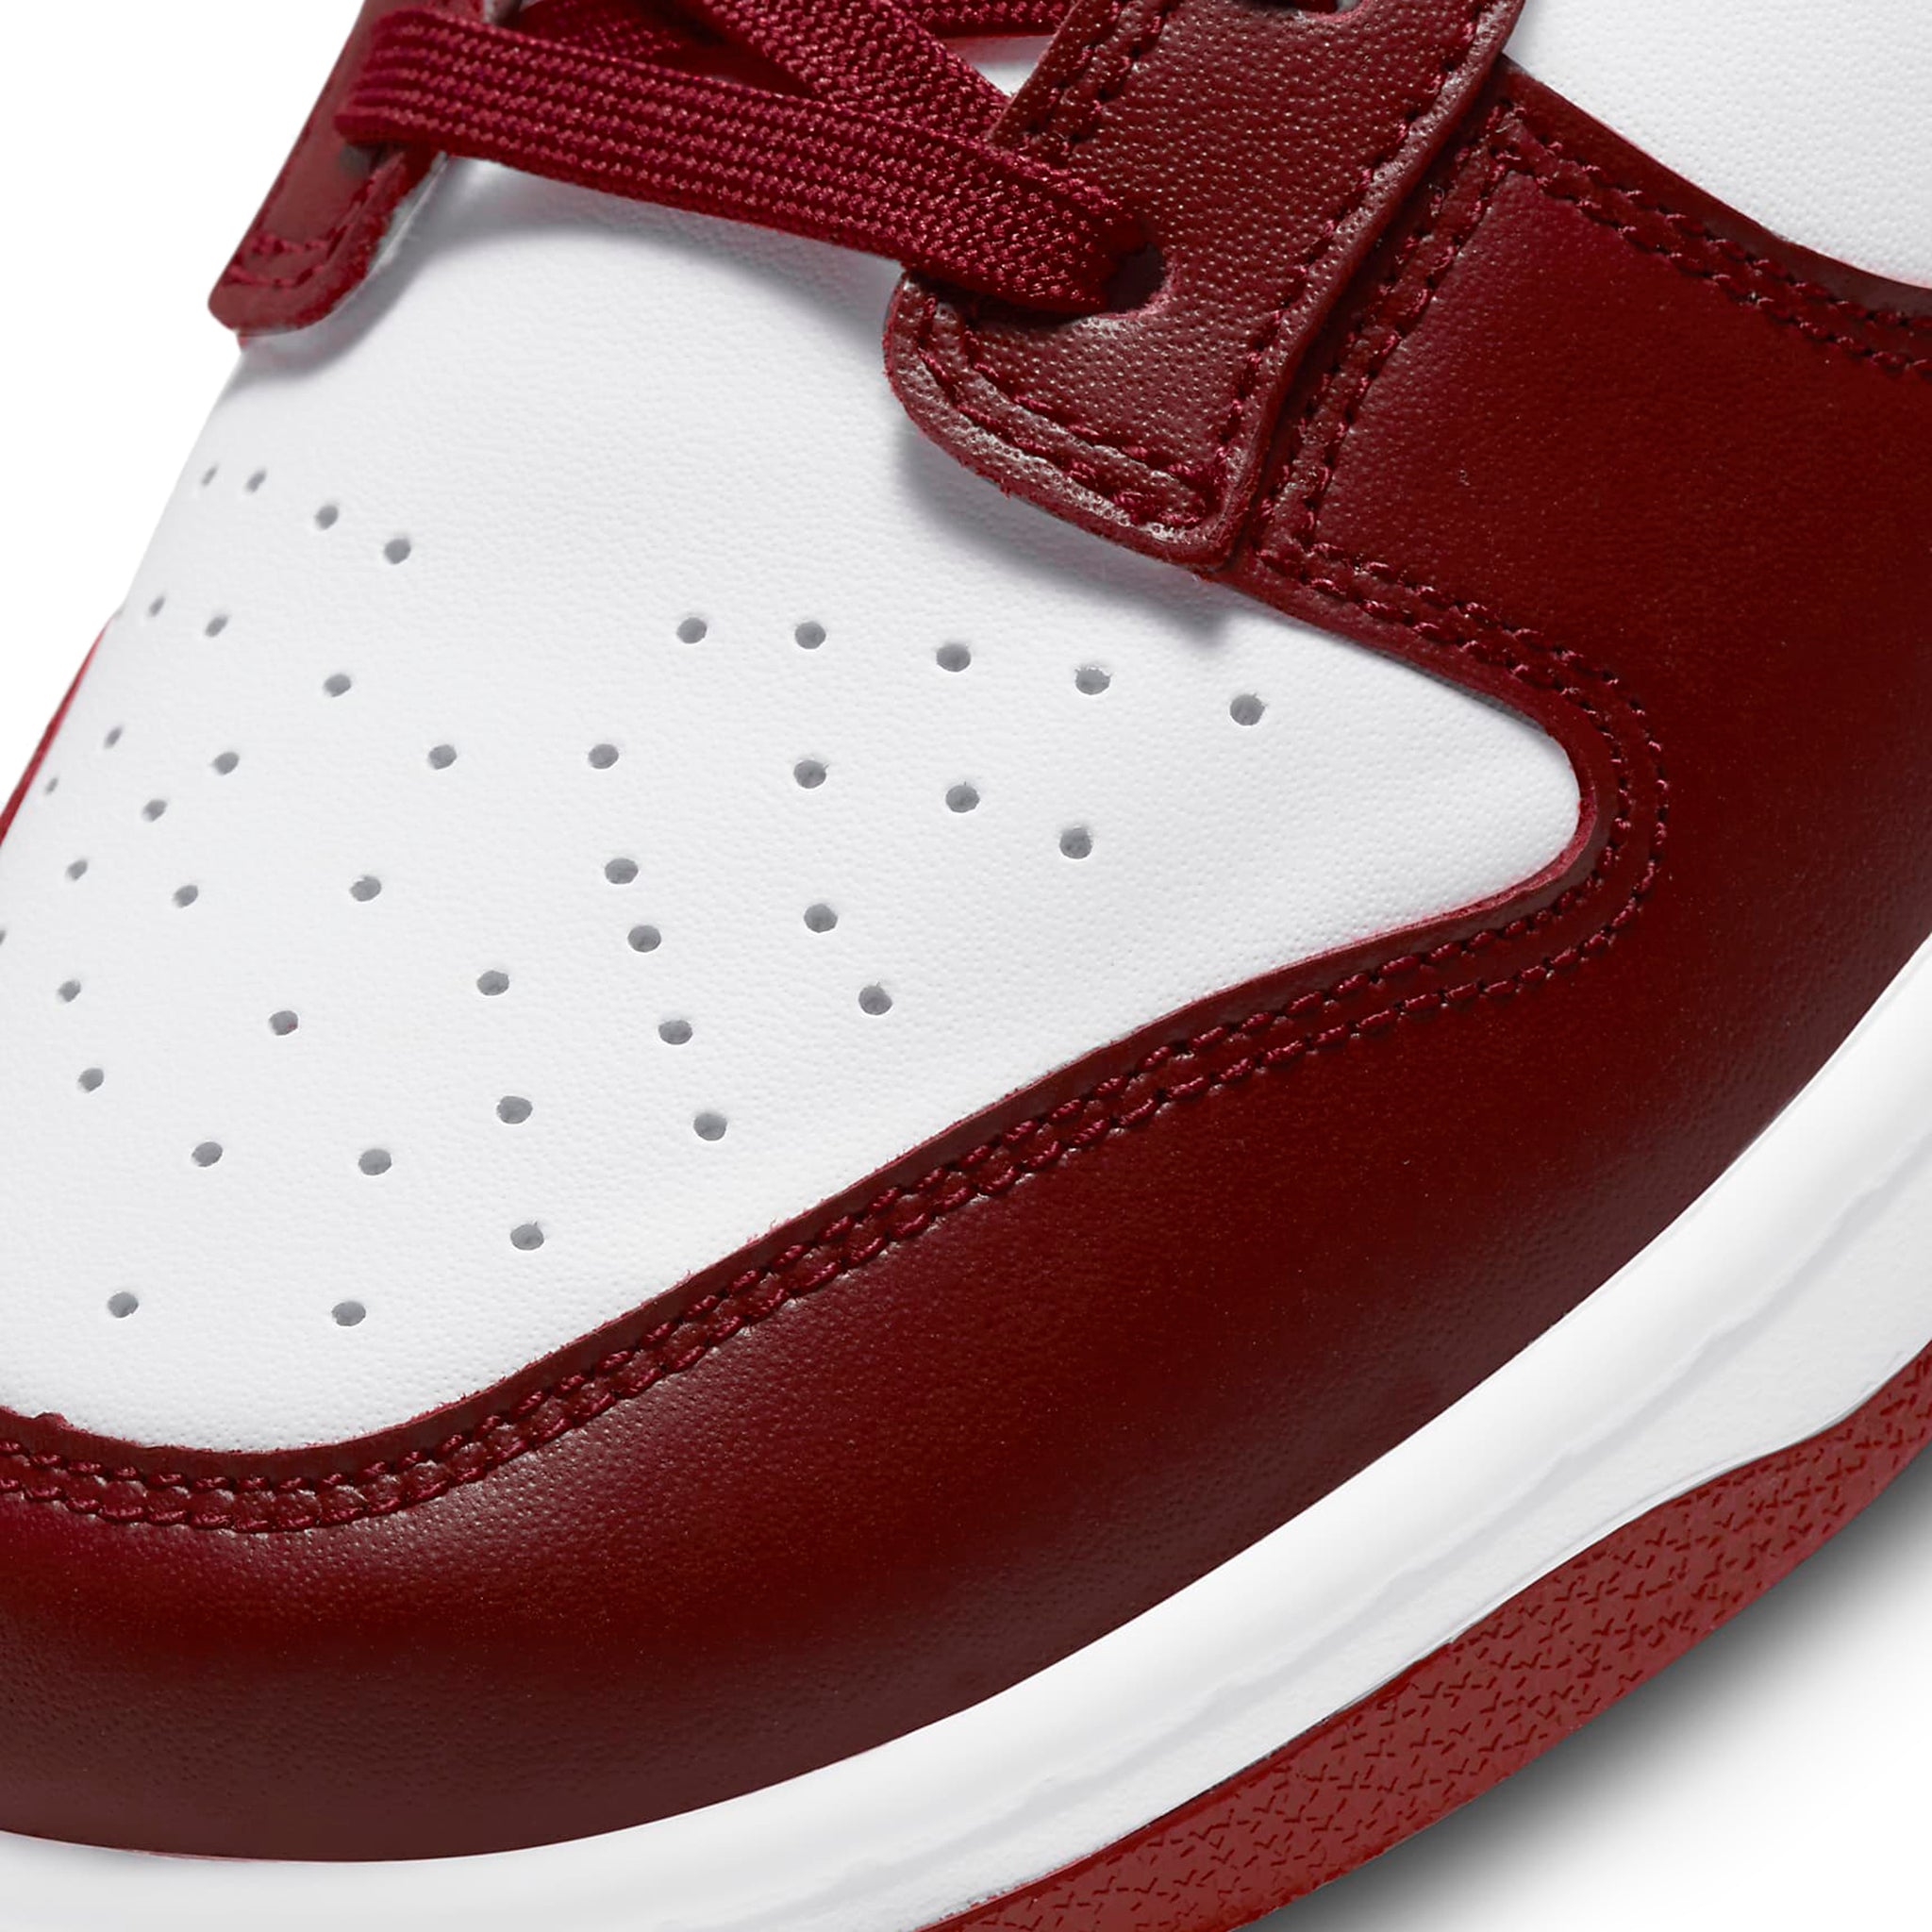 Toe box view of Nike Dunk Low Team Red D1391-601